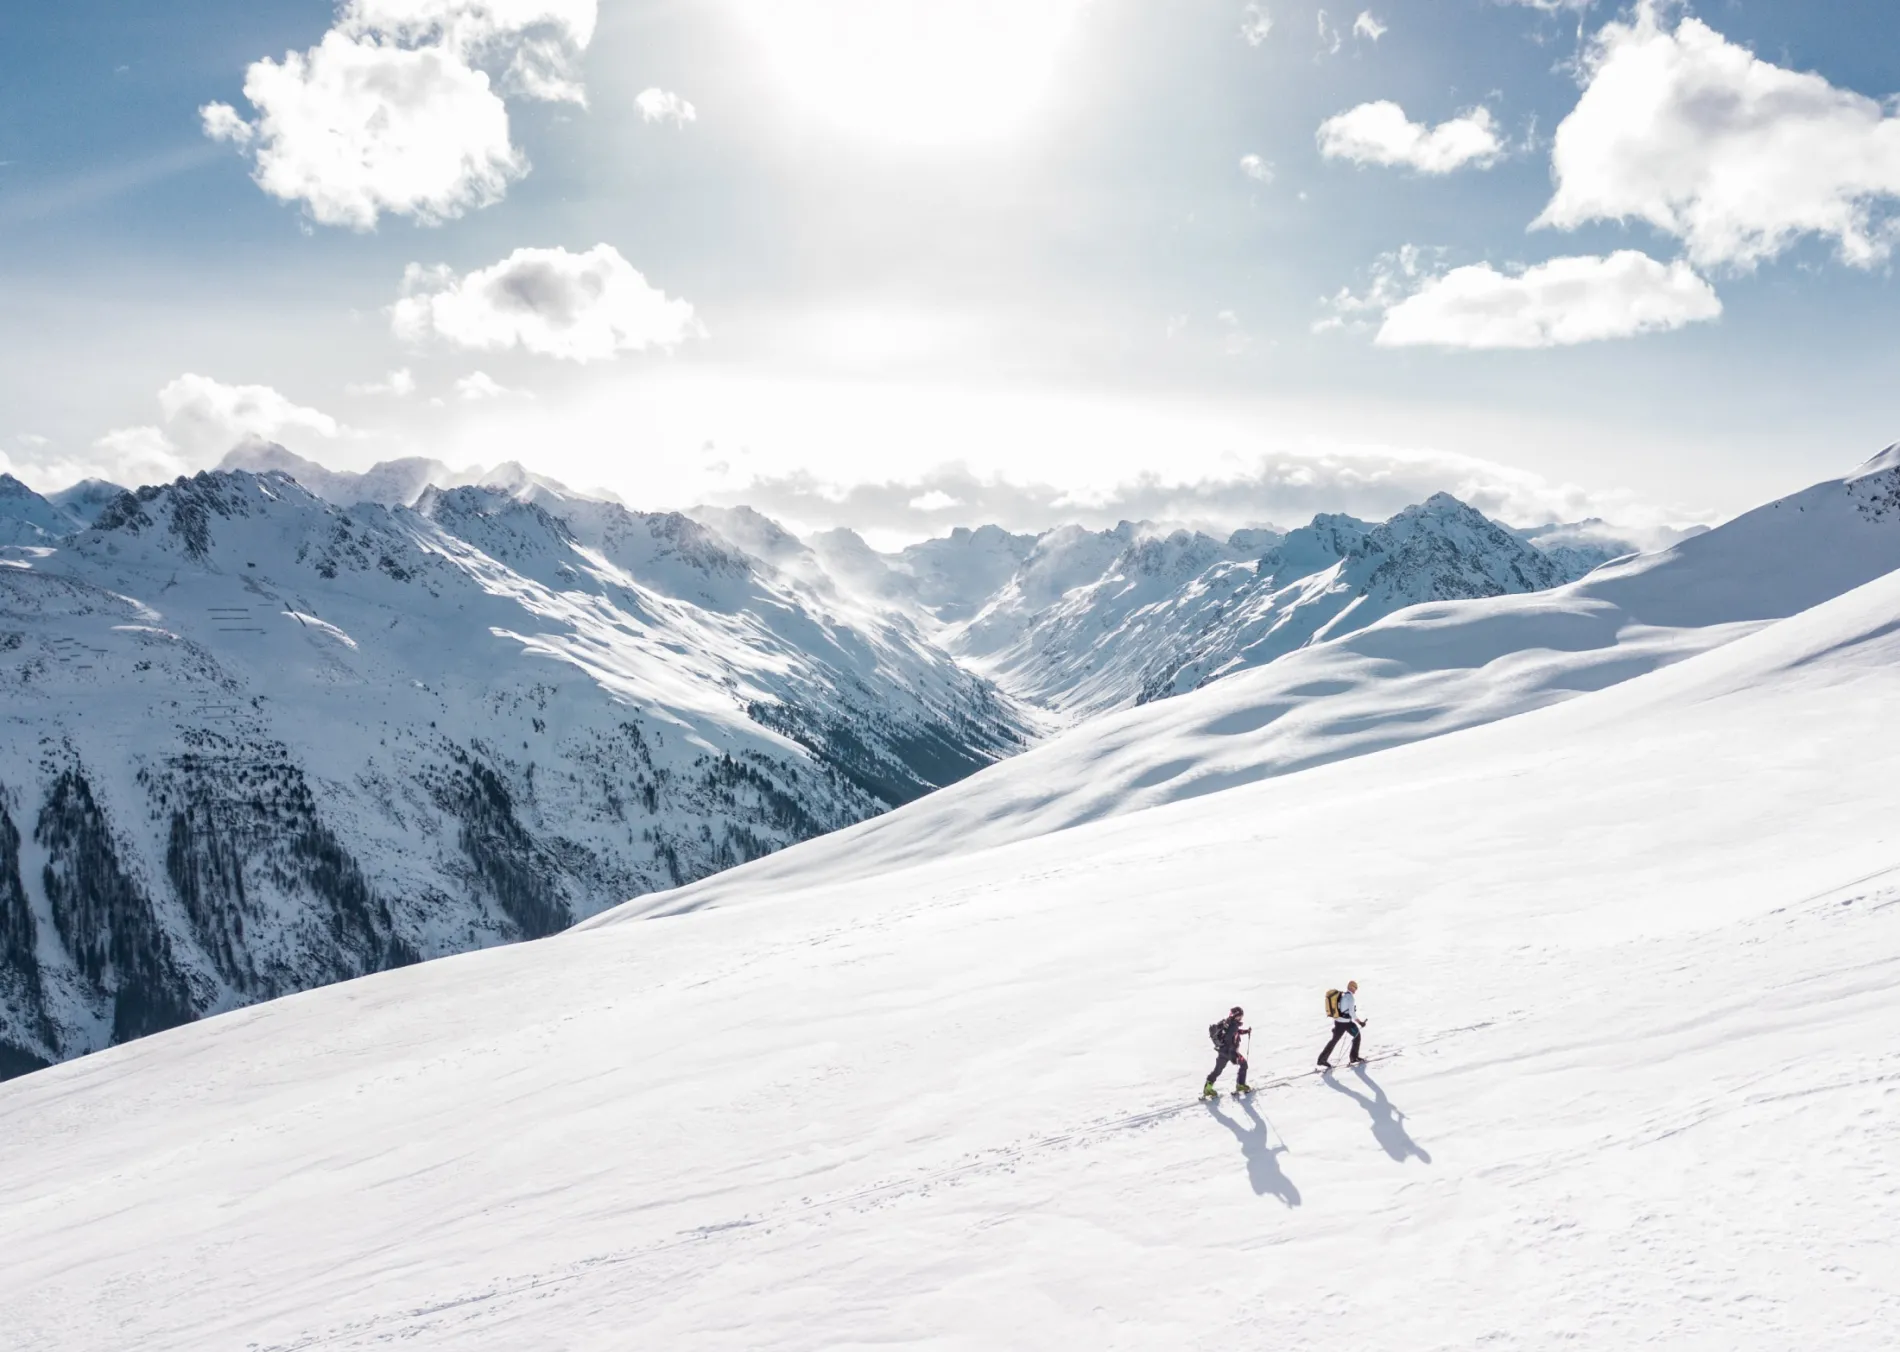 Two backcountry skiers touring in the mountains